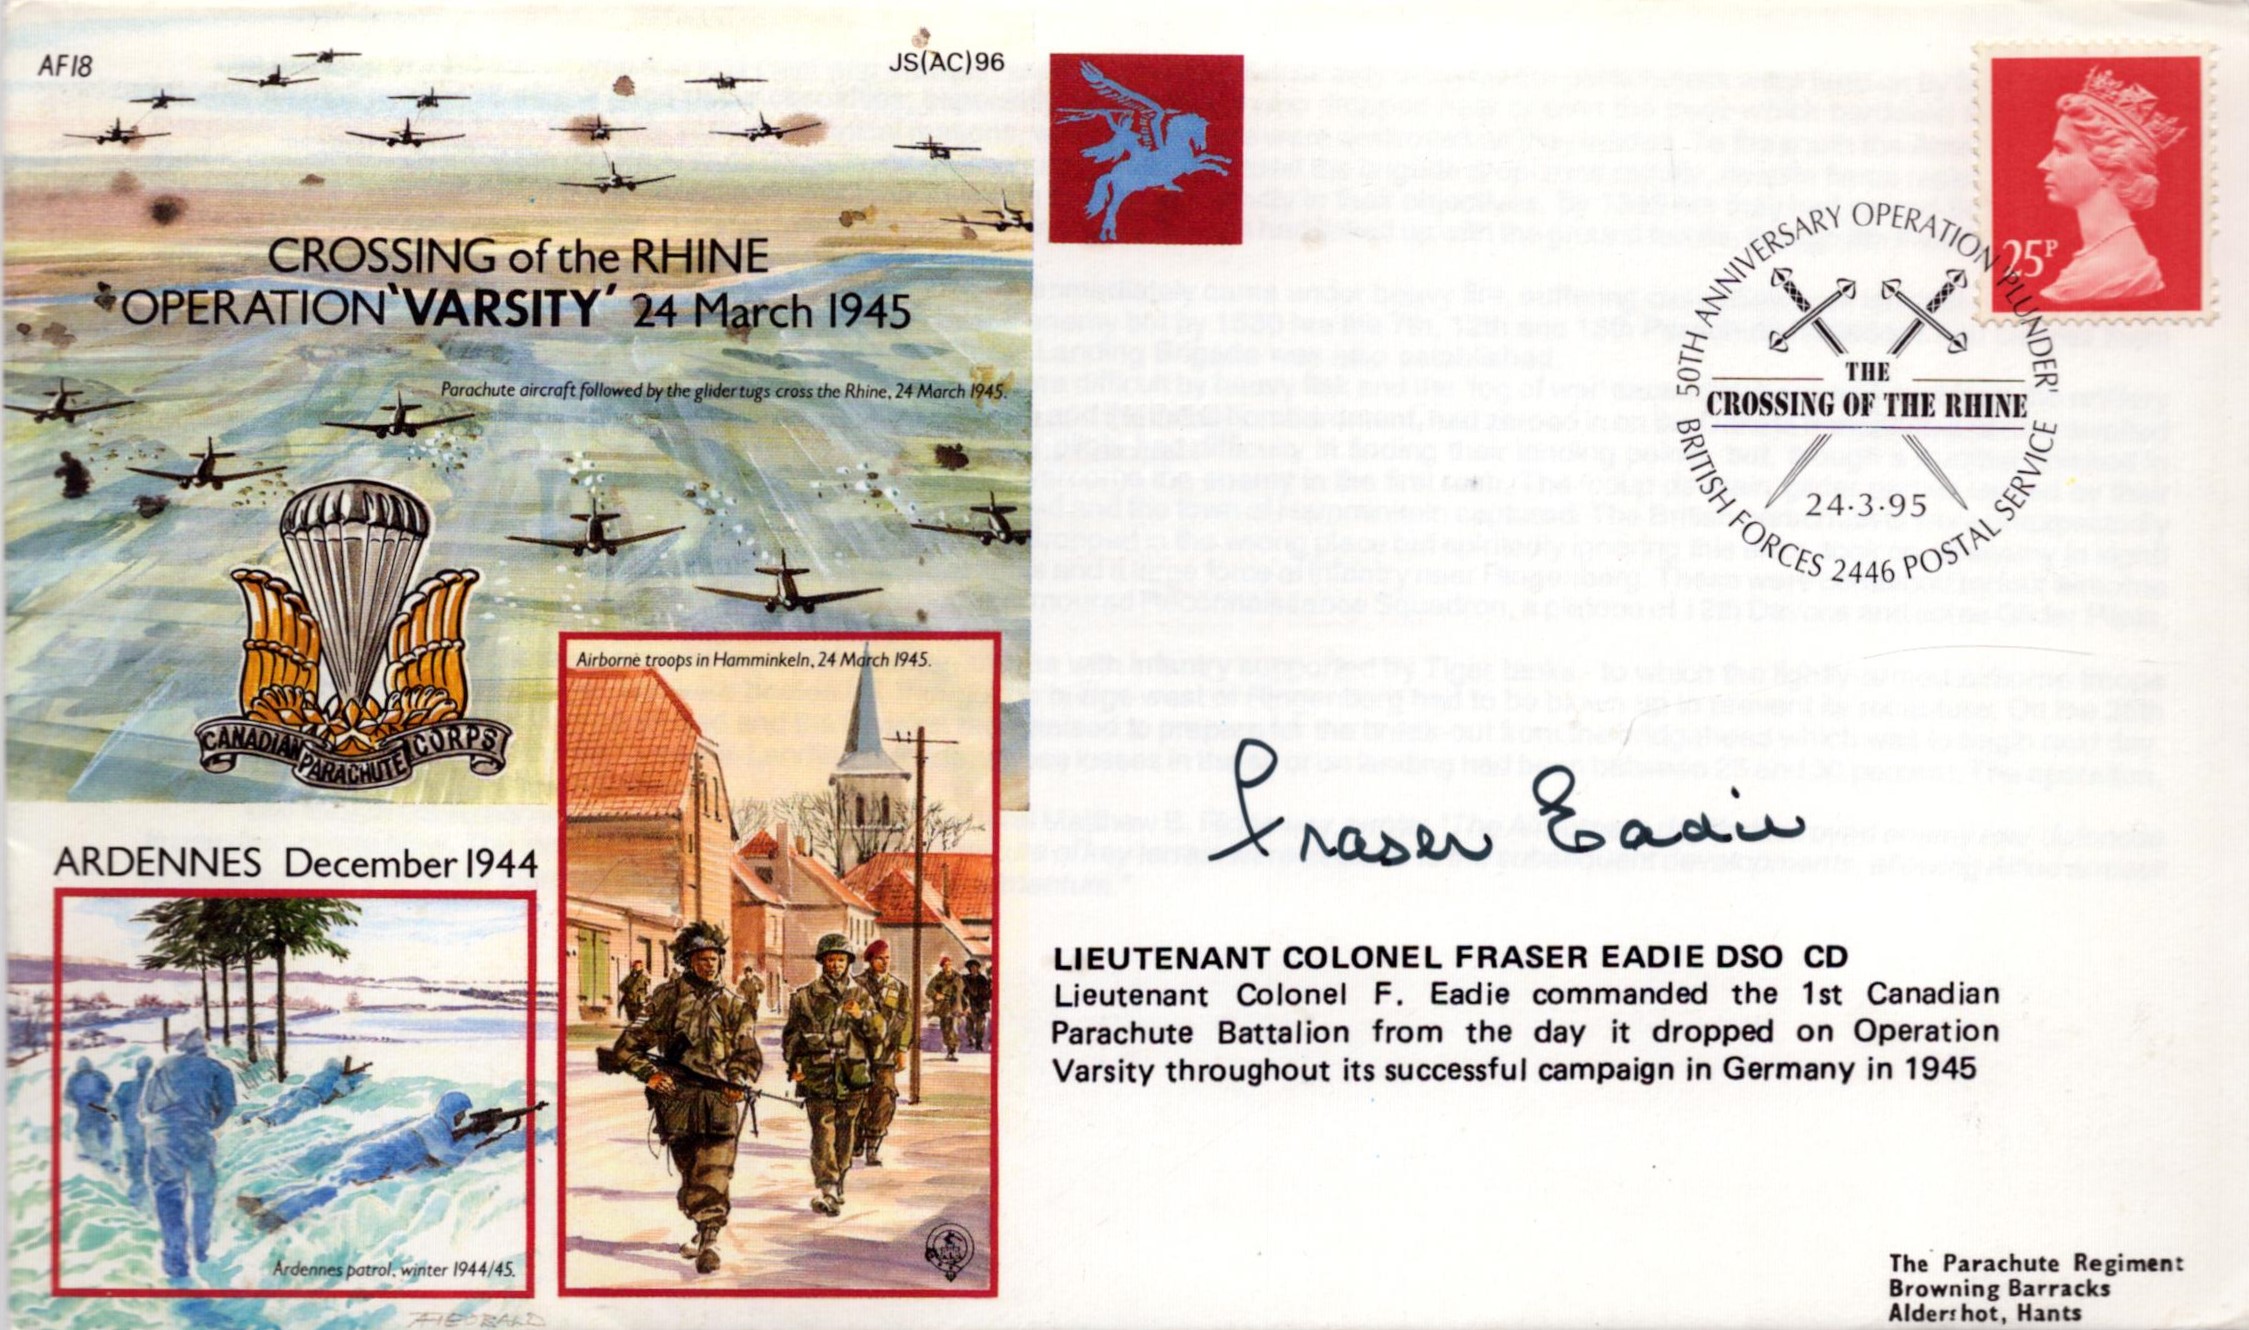 WWII Lieutenant Colonel Fraser Eadie DSO CD signed Crossing of the Rhine Operation 'Varsity@ 24